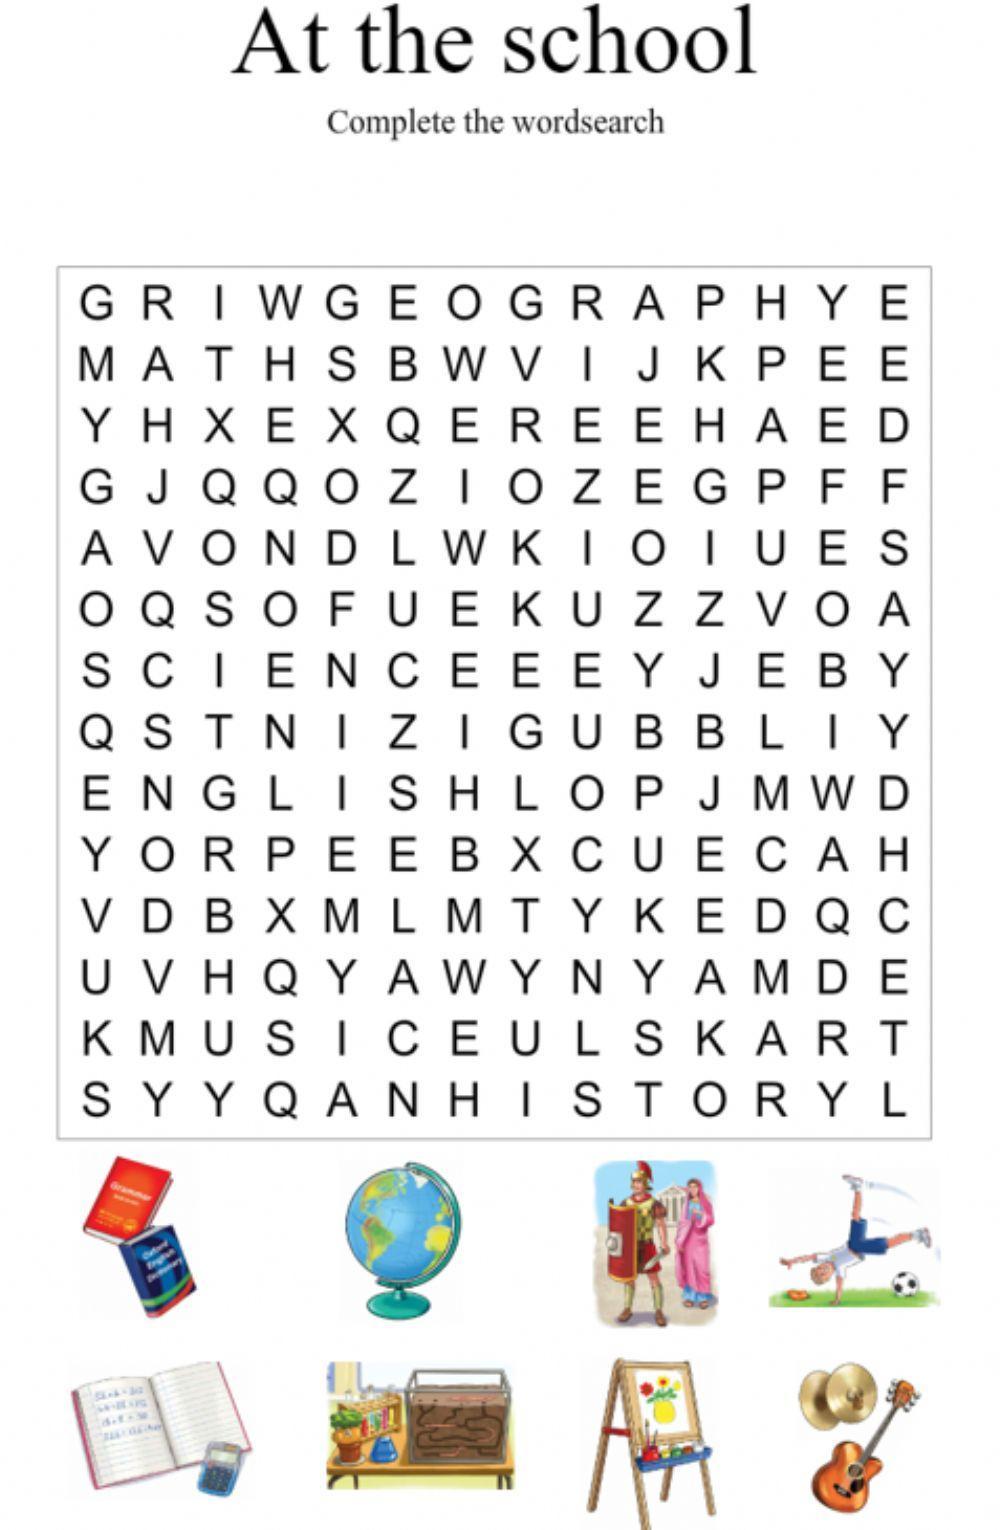 At the school. Wordsearch